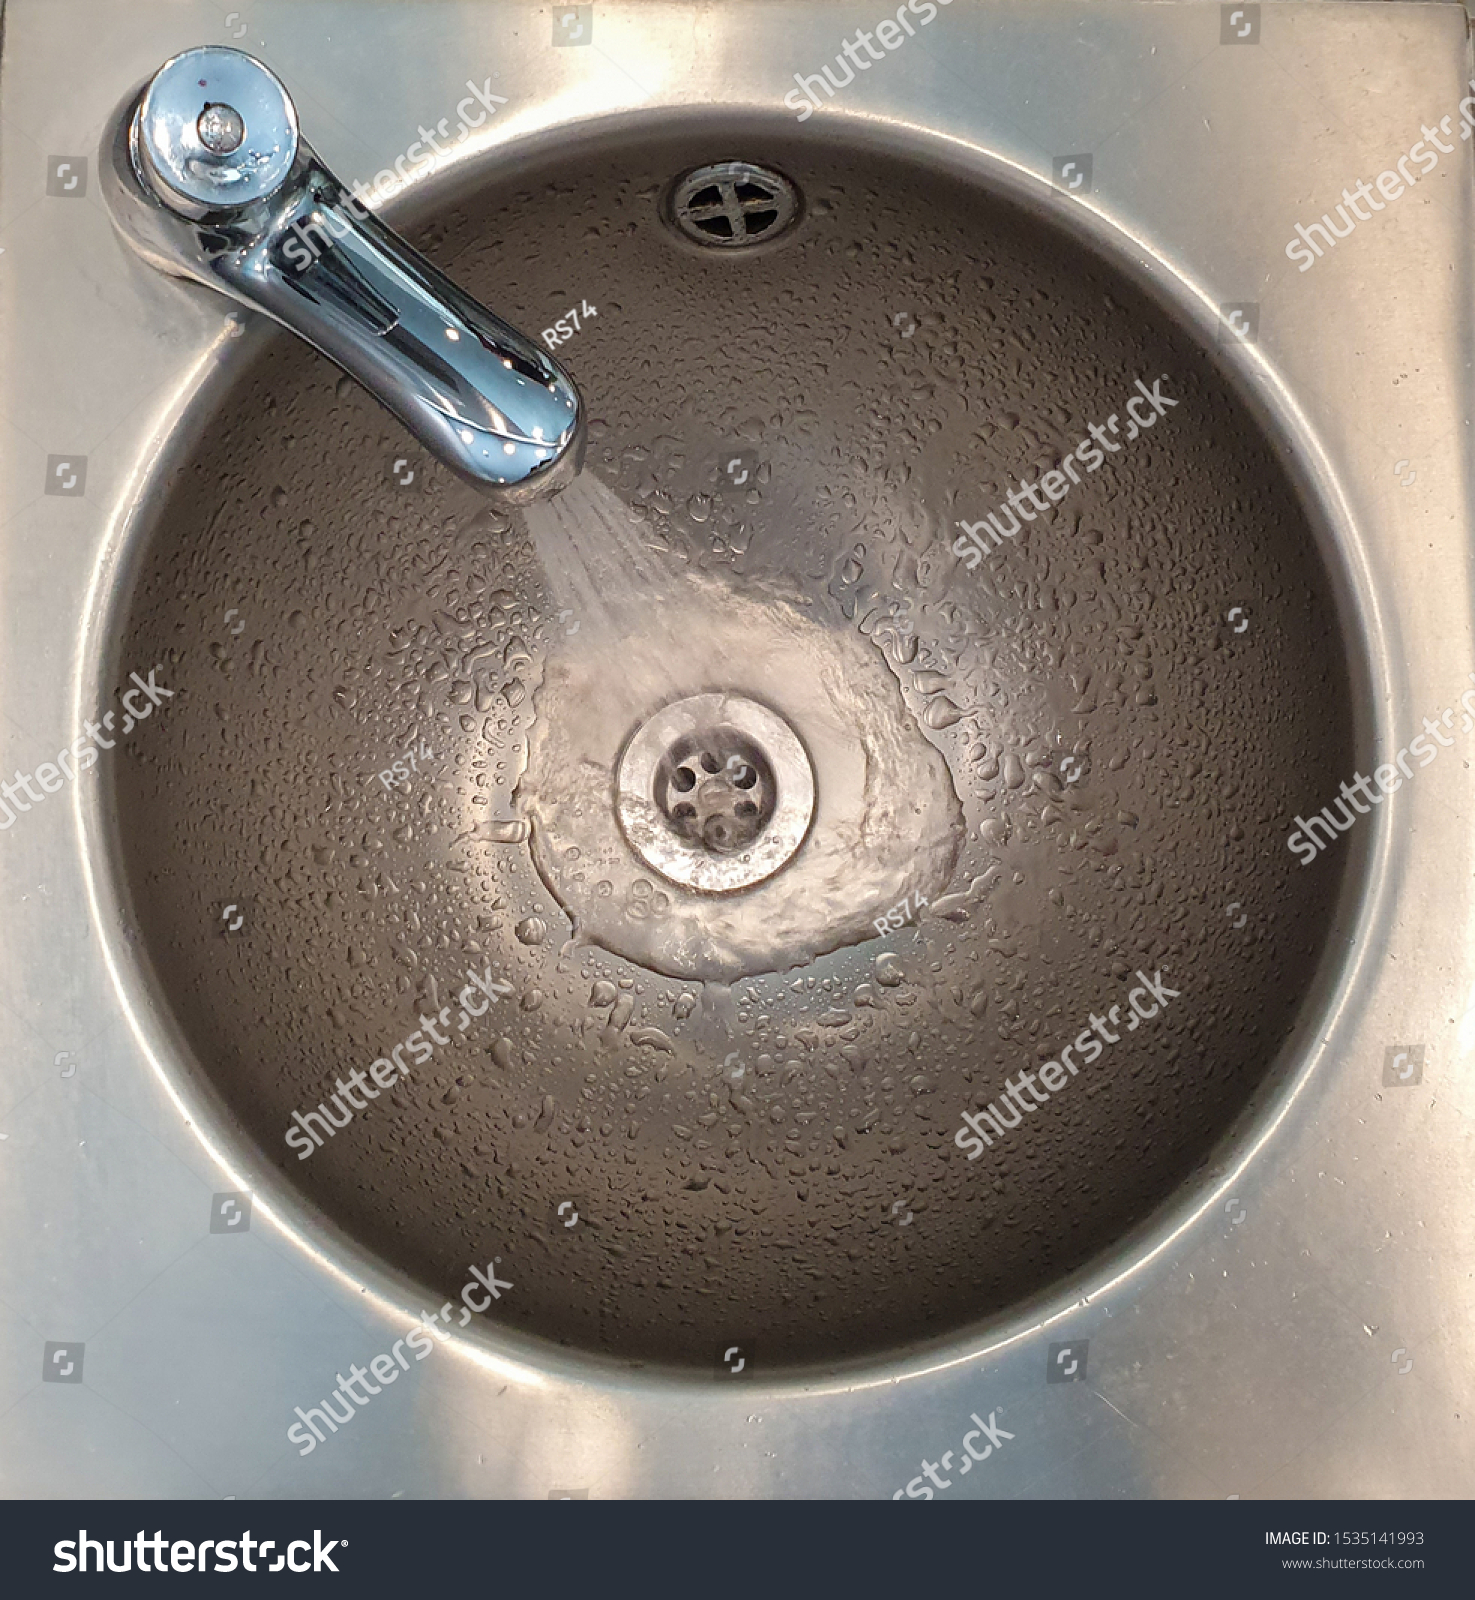 Faucet Running Water Metal Sink Use Stock Photo Edit Now 1535141993